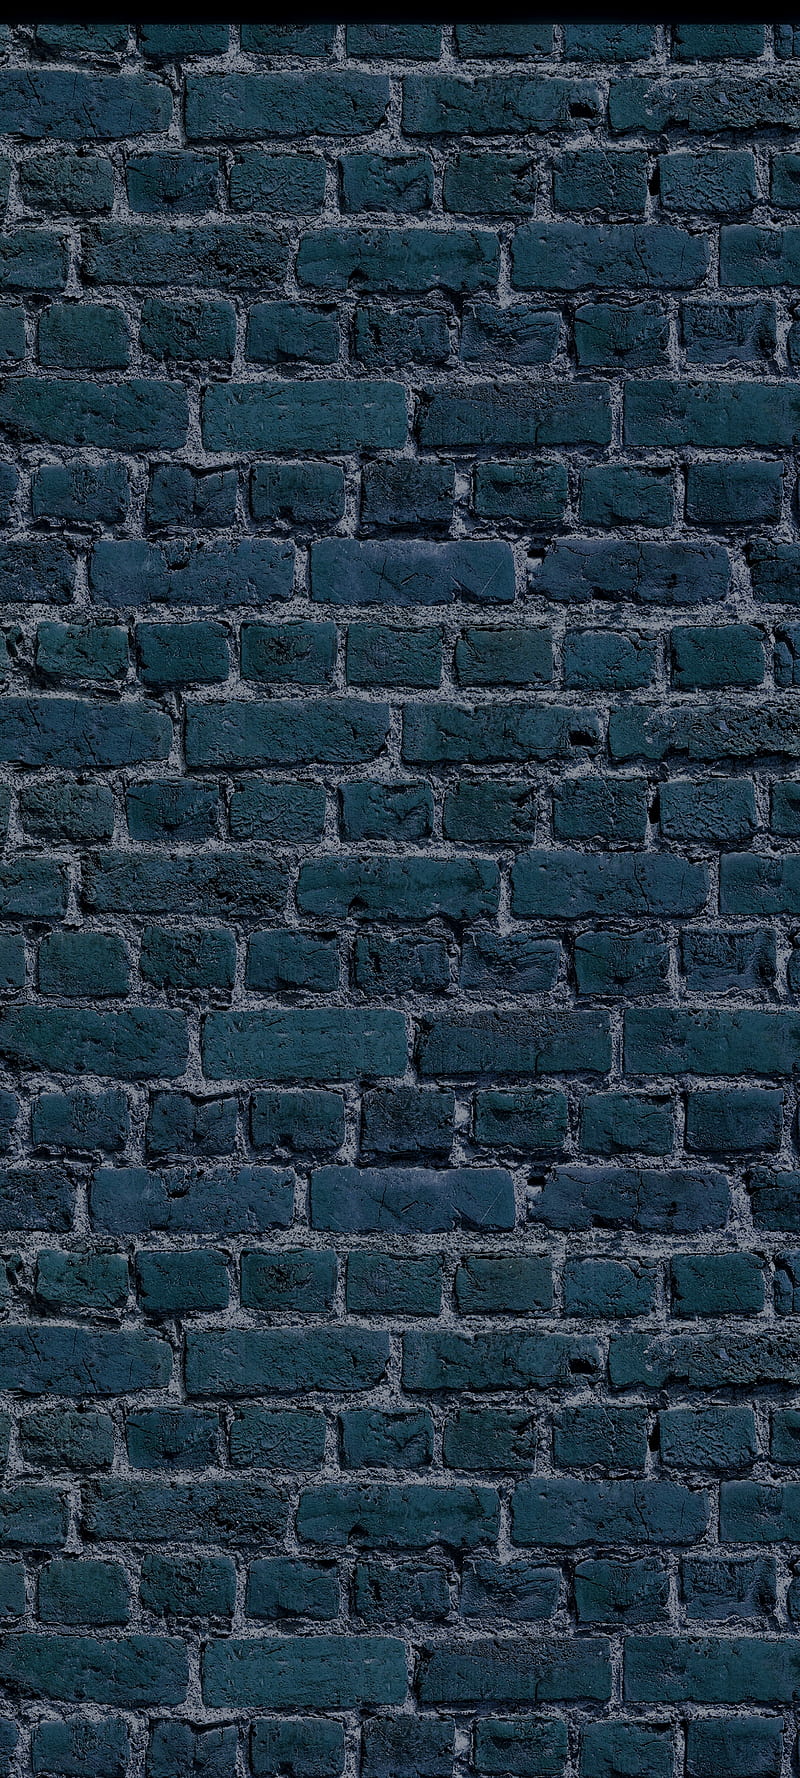 Apple Vintage Blue, Samsung Galaxy, Art, Wall, material property, Coolest, Standard, Simple, Cool 2021, A51, Dekor, brickwork, Bricks, old, M32, Magma, Android, Winner, Acer, Huawai, No1, iPhone12, Druffix Award, Nokia, Business Style, HD phone wallpaper